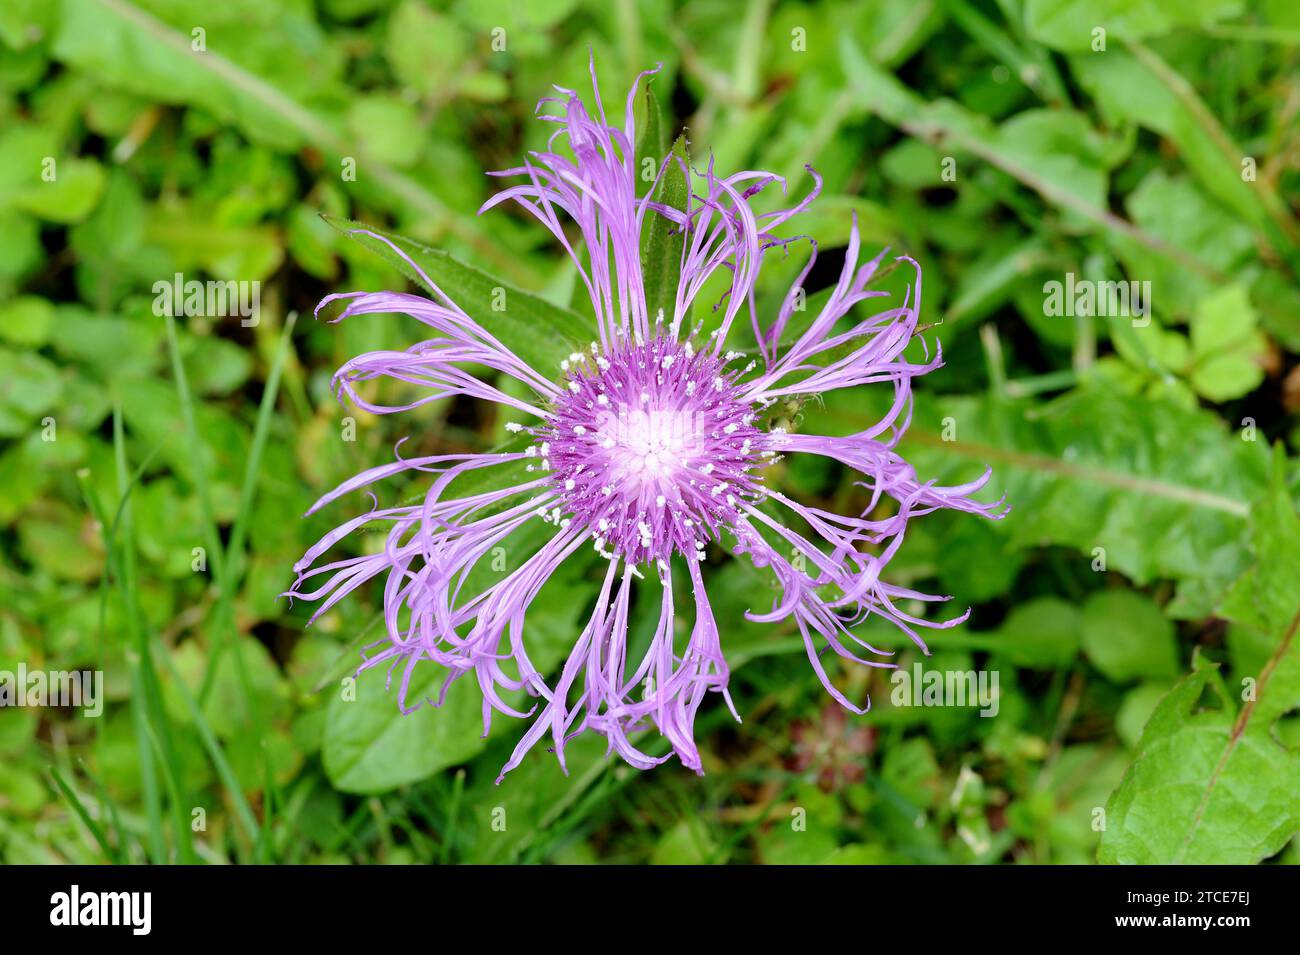 Alpine greater knapweed (Centaurea scabiosa alpestris) is a perennial plant native to Europe. Inflorescence detail. This photo was taken in Alps, Fran Stock Photo